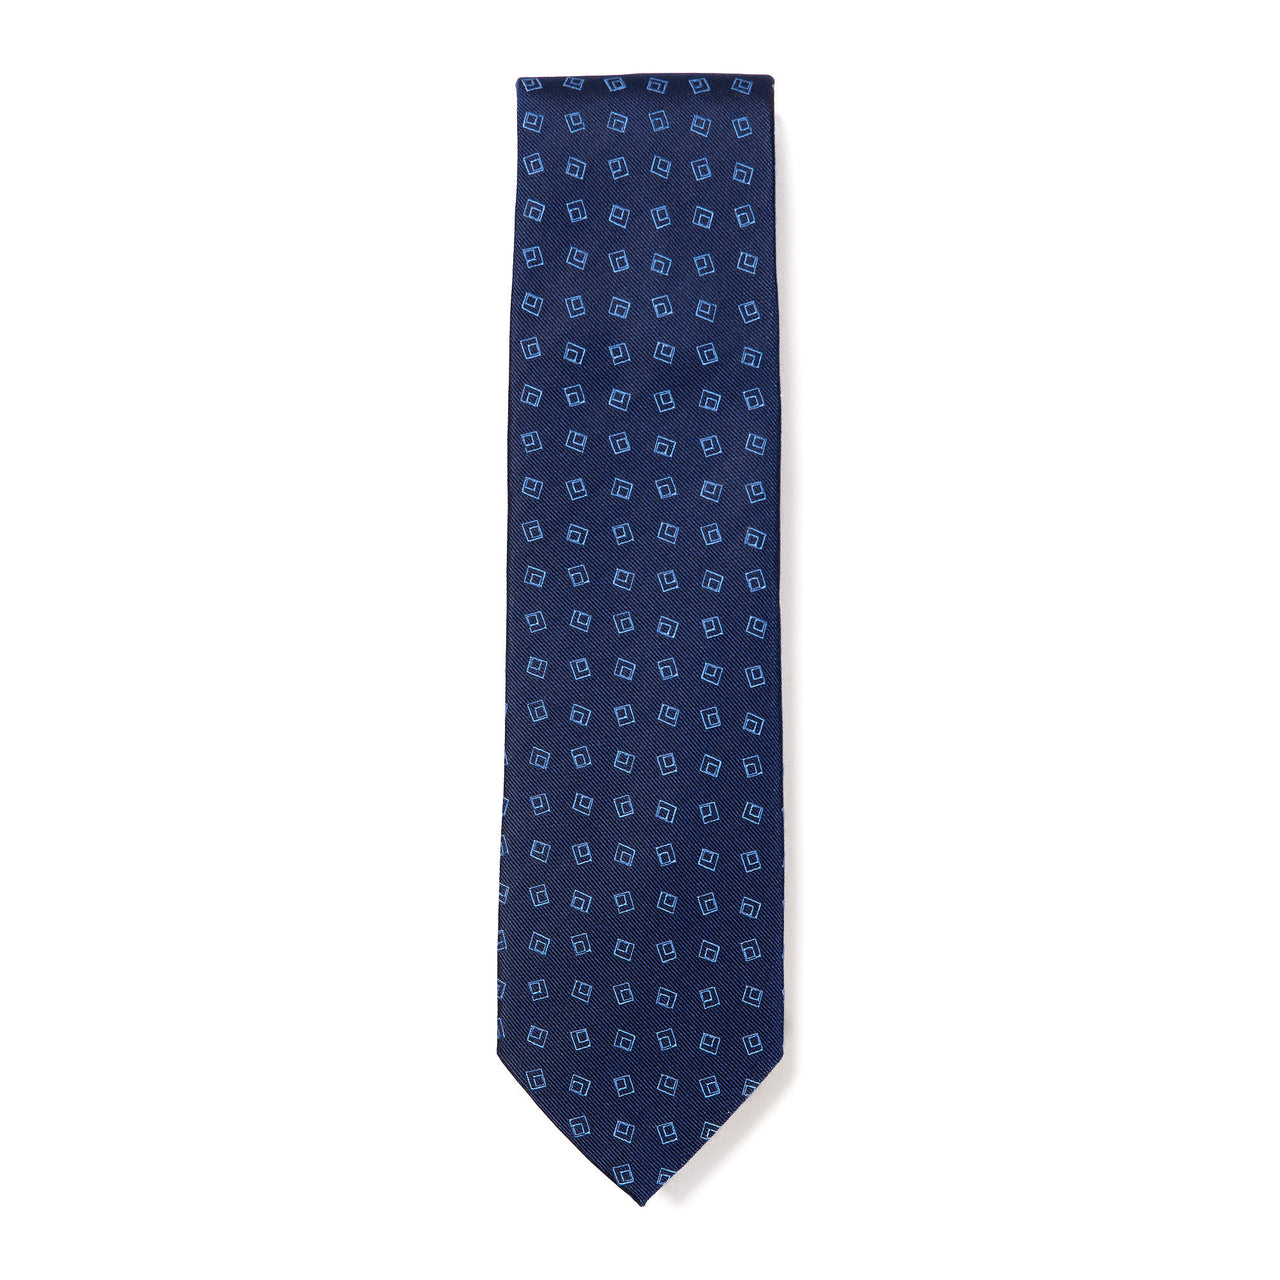 HENRY SARTORIAL X CANTINI Woven Silk Tie NAVY/BLUE